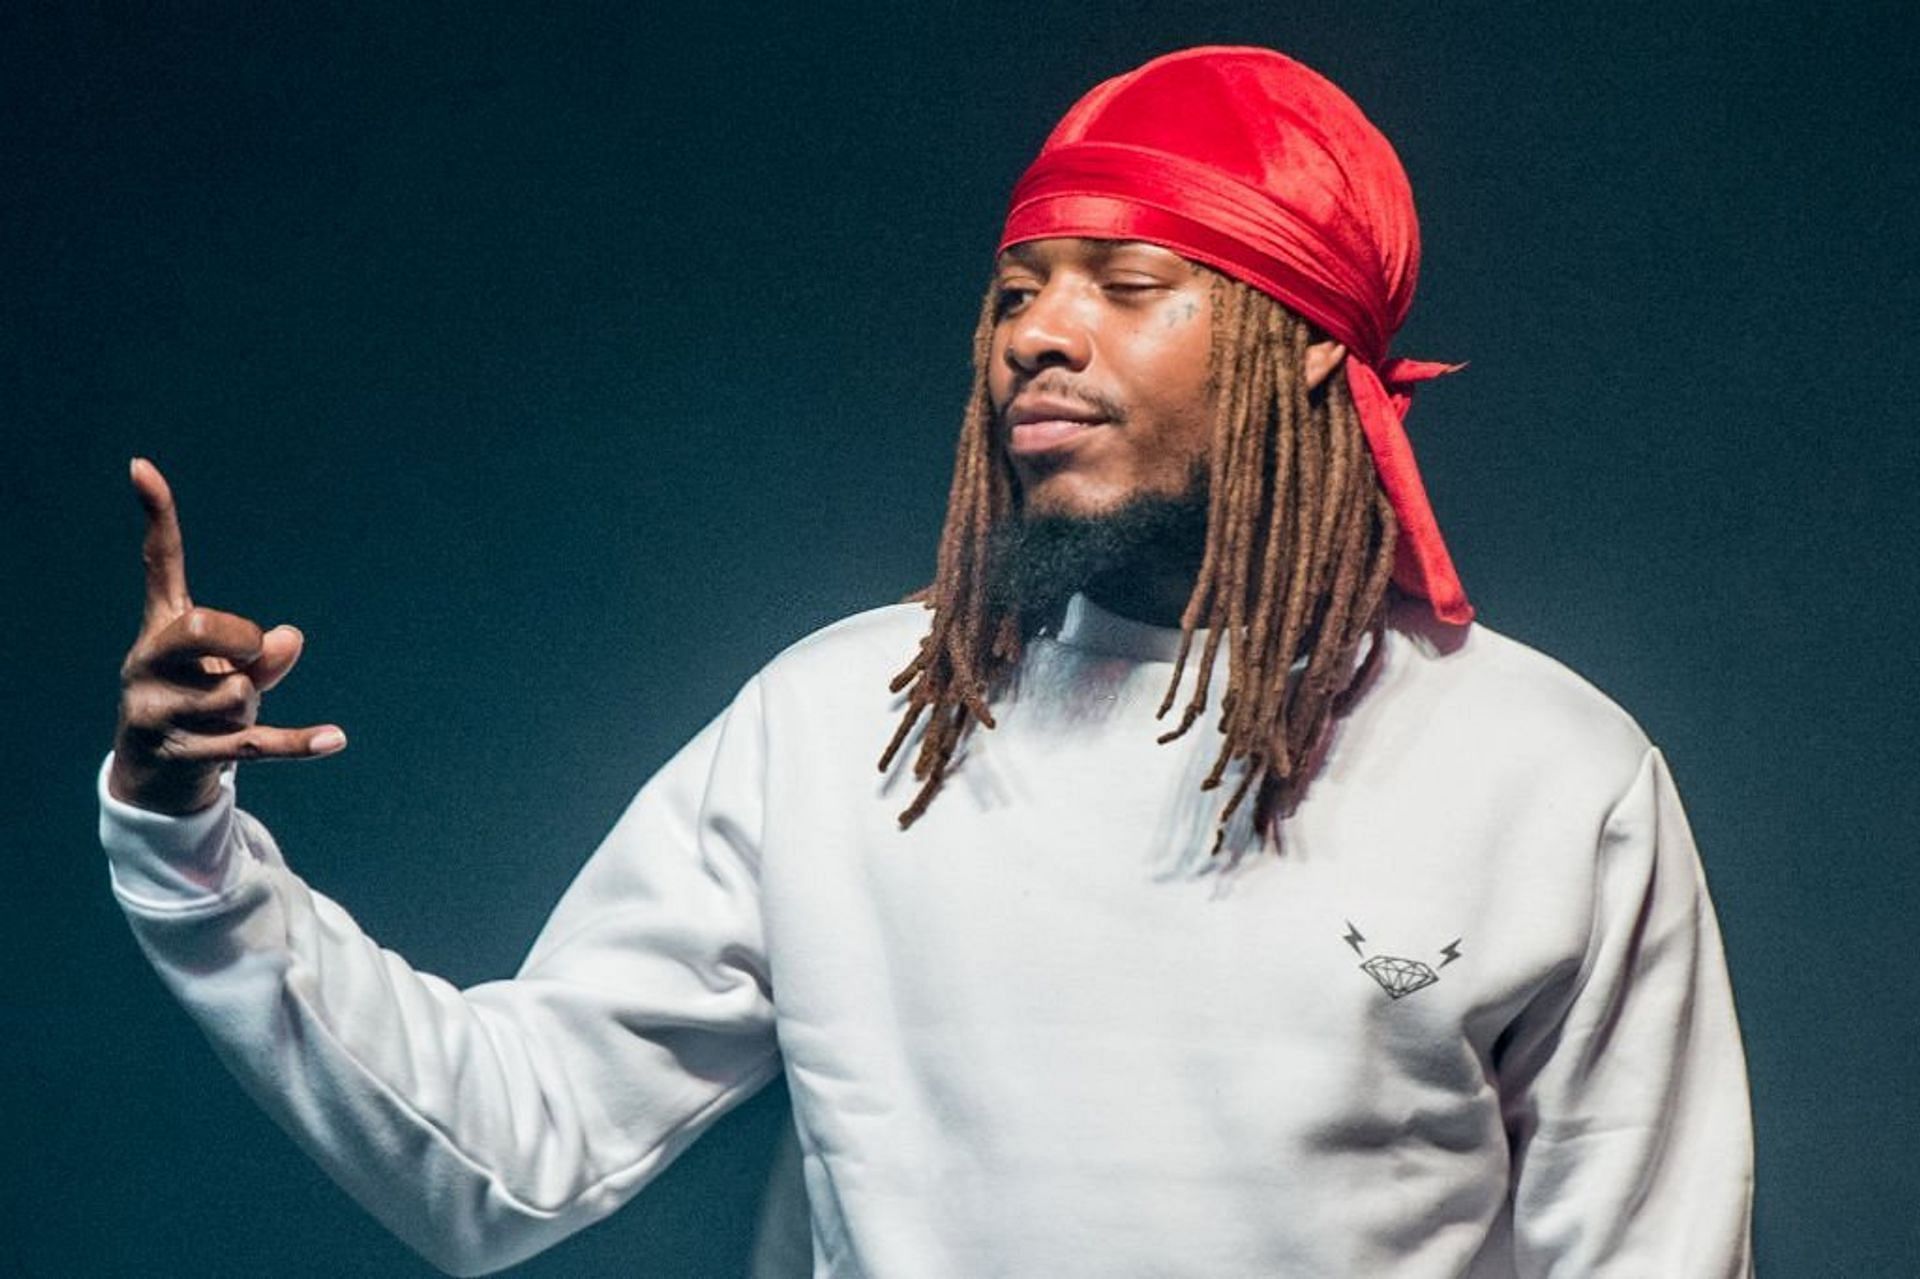 Fetty Wap performs on stage at o2 Forum Kentish Town (Image via Ollie Millington/Getty Images)